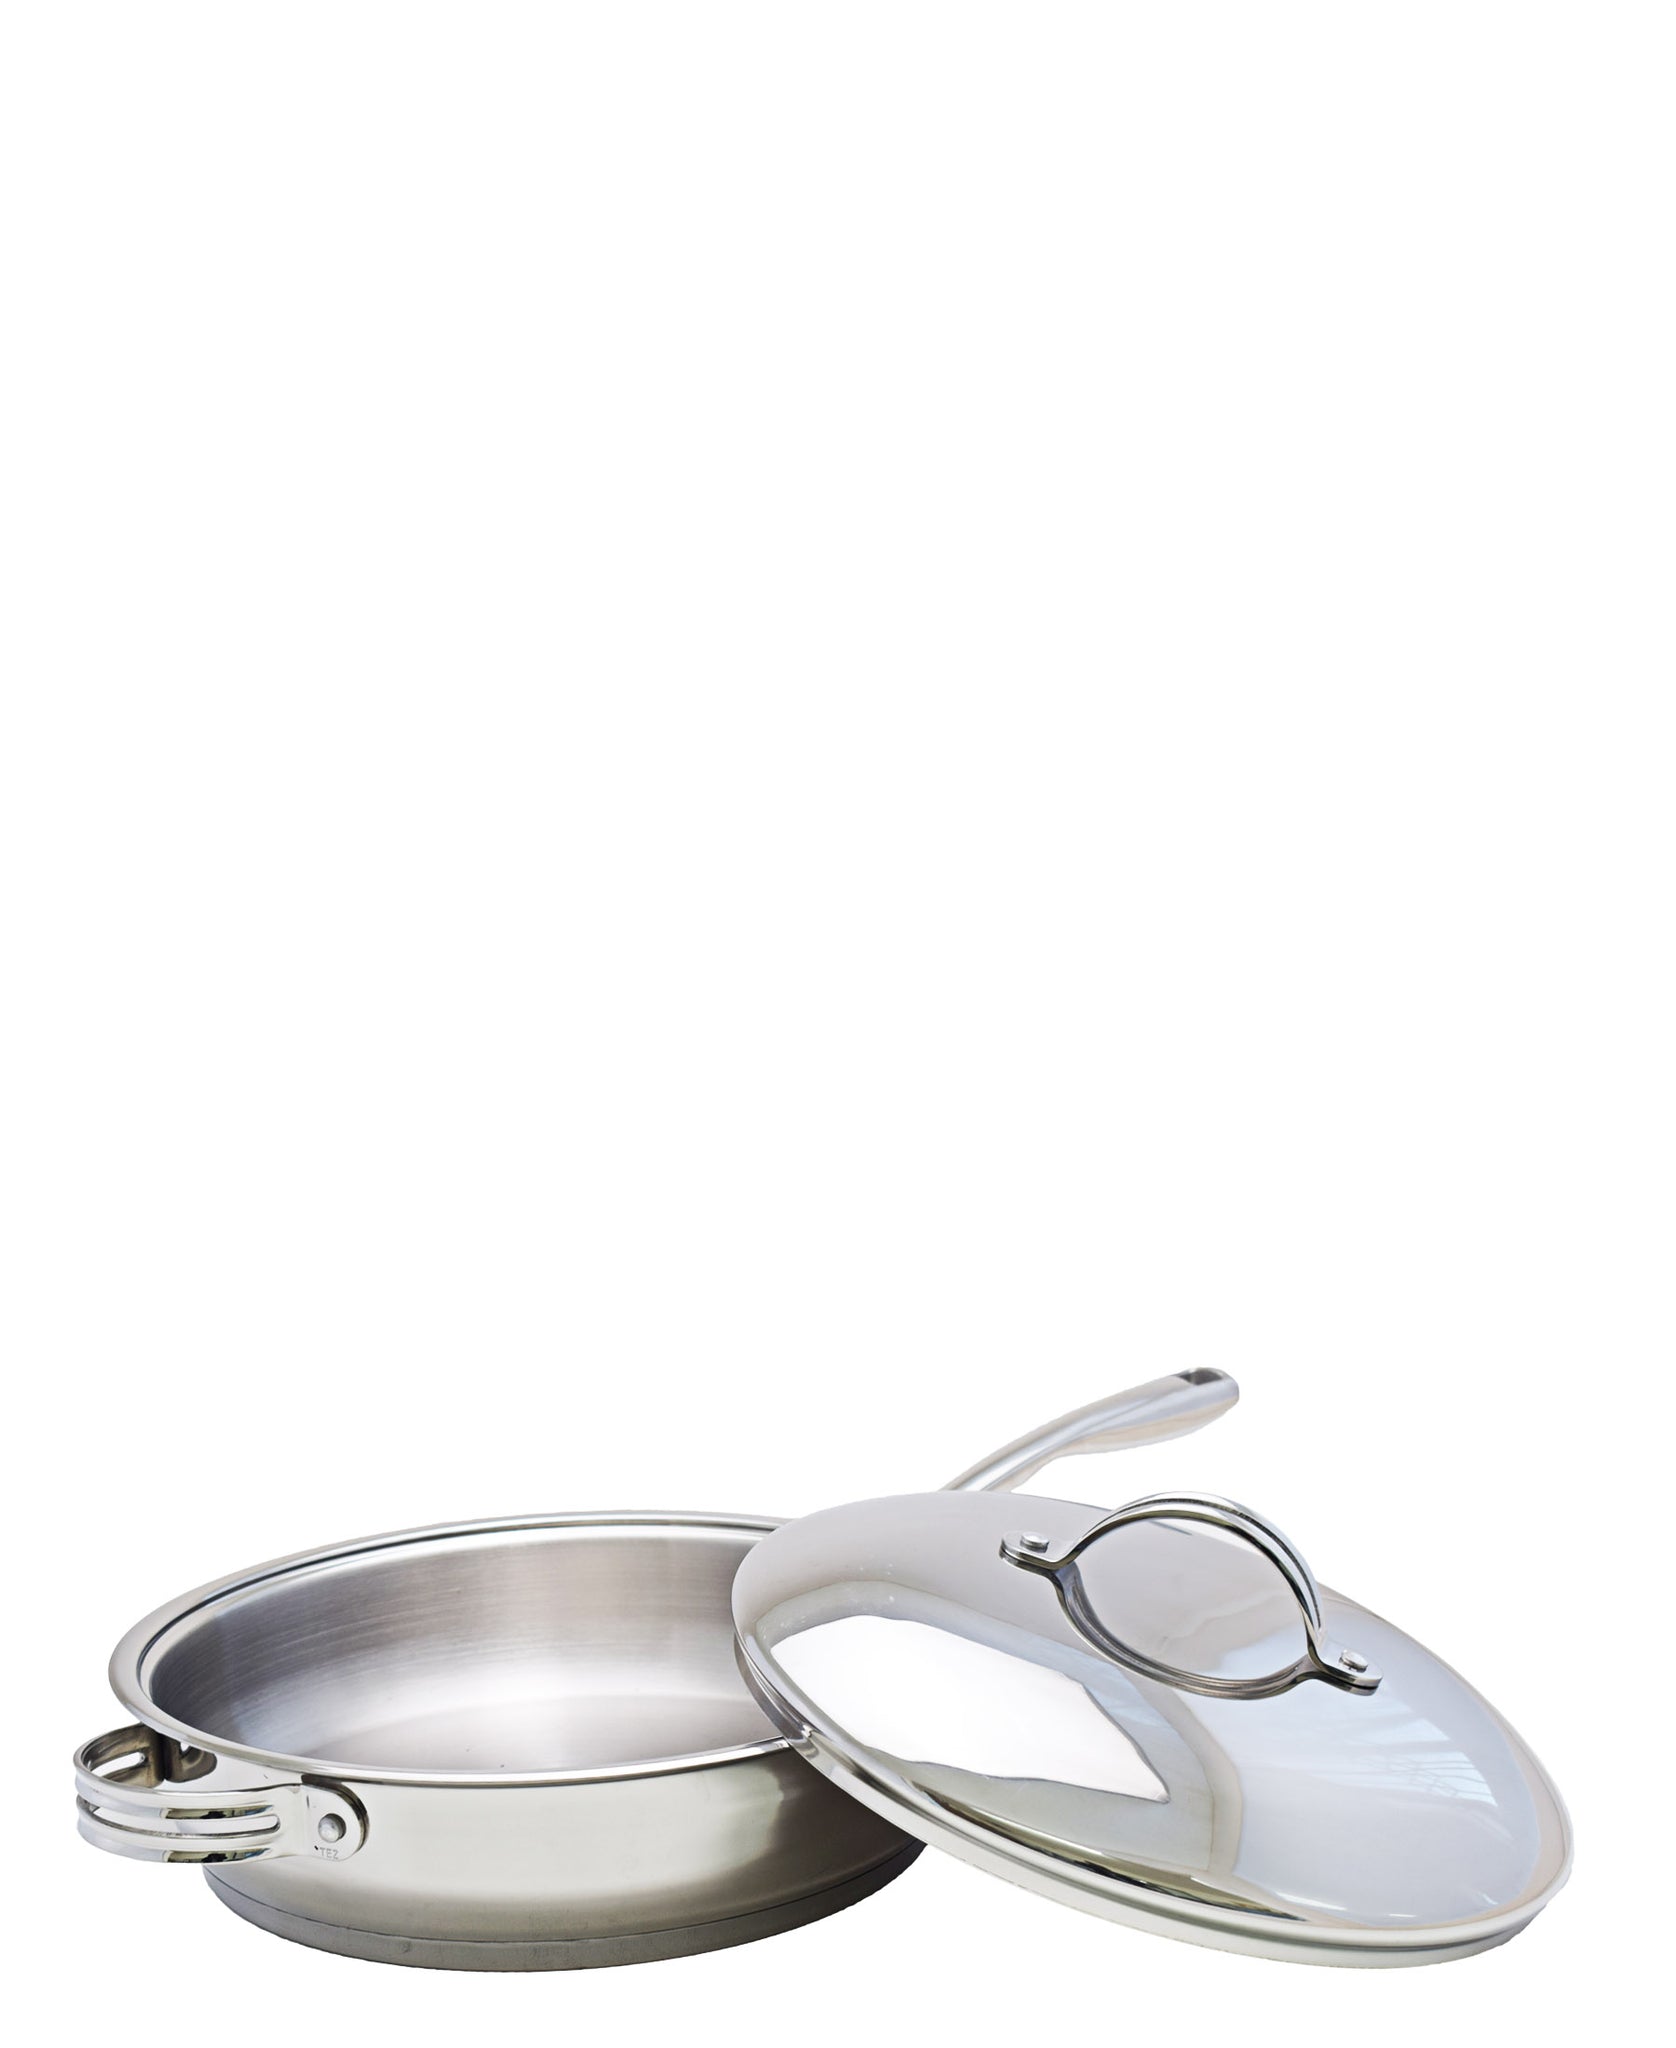 Tez 32cm Fry Pan With Lid - Silver